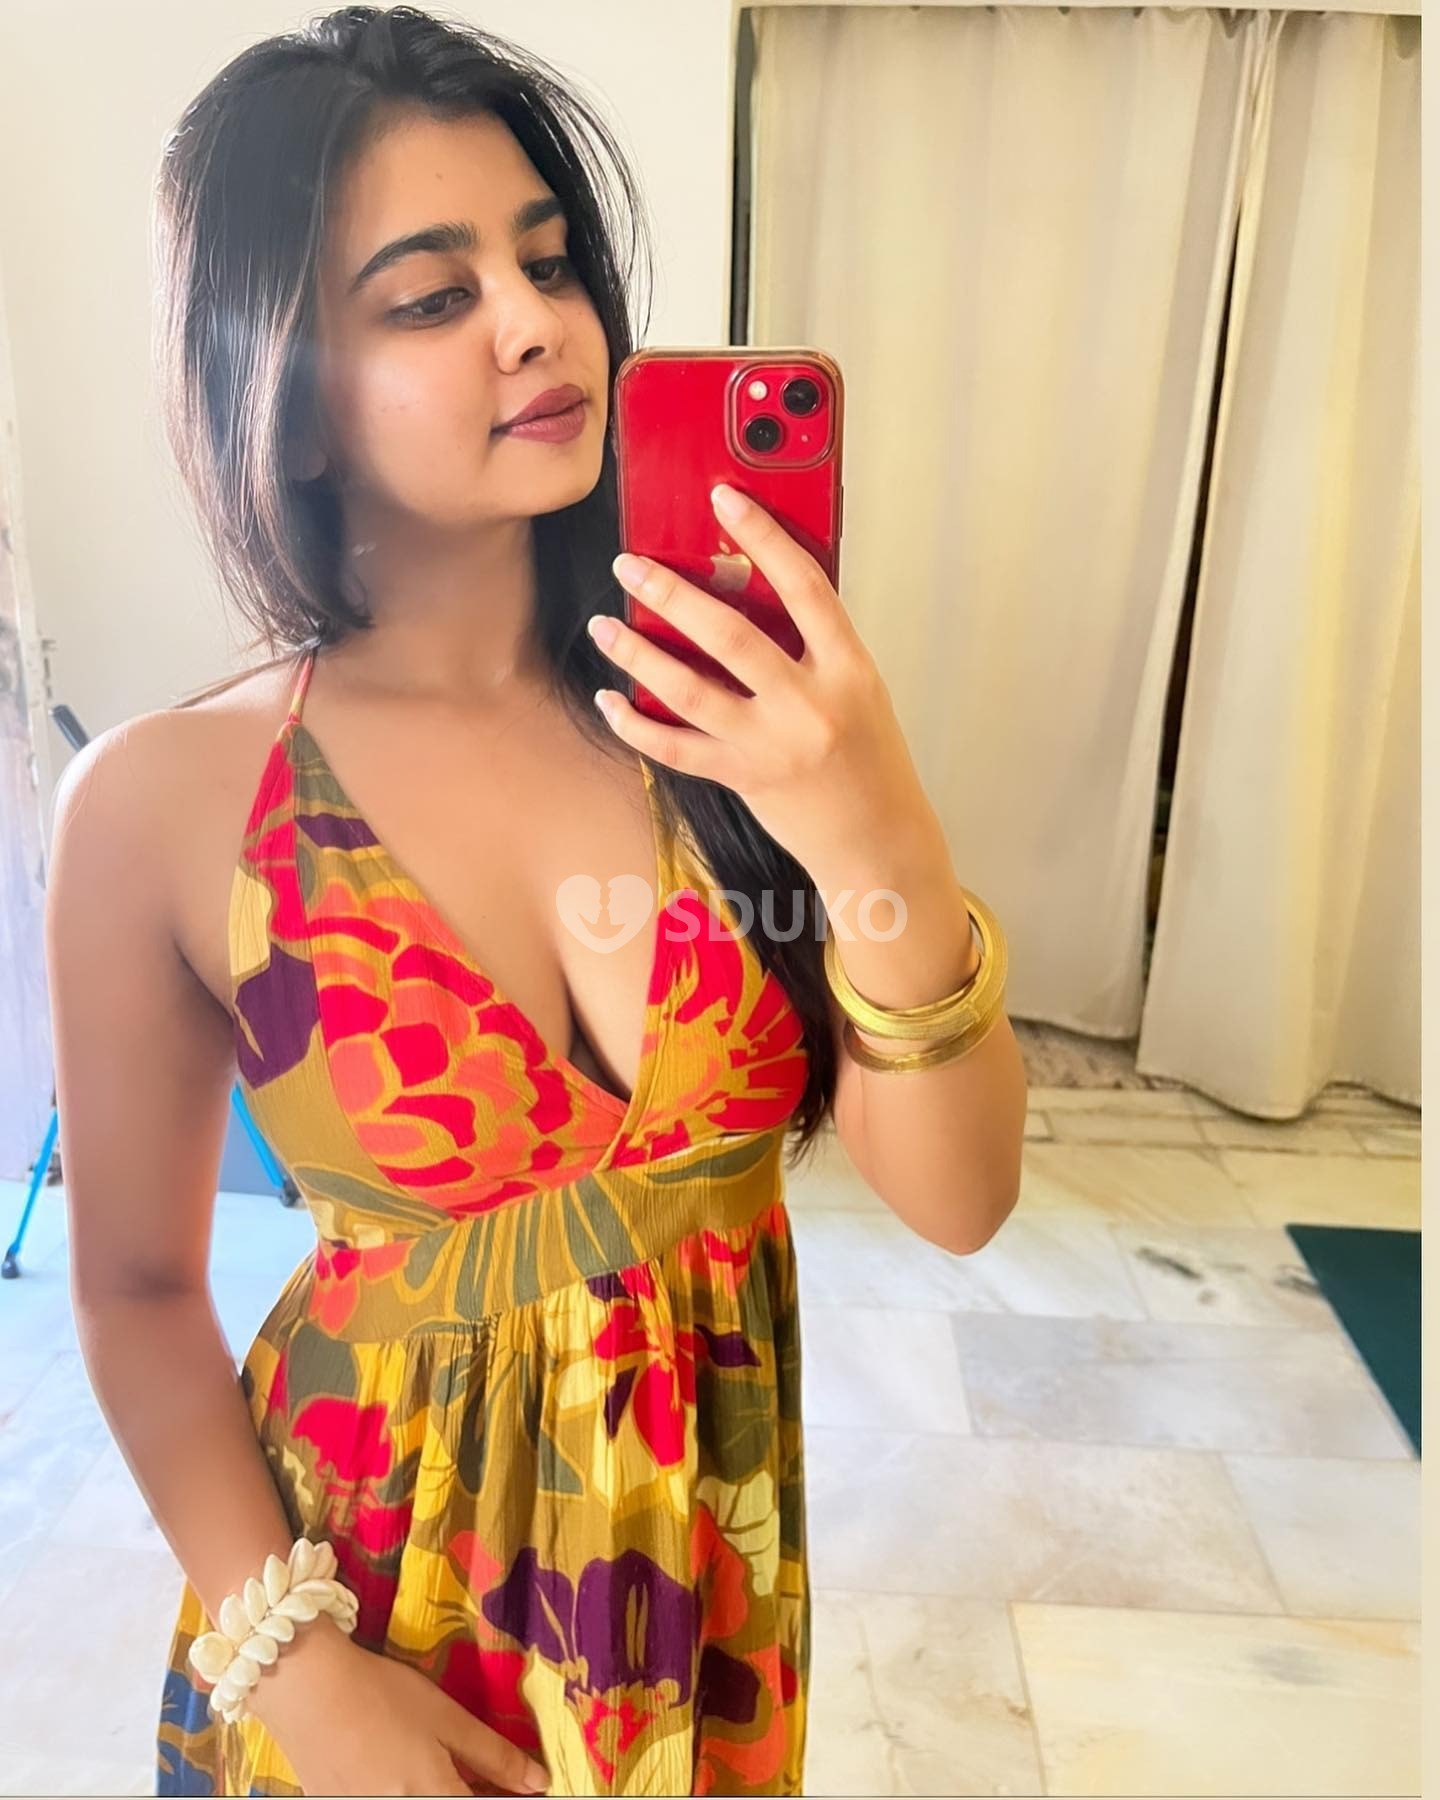 Panchkula CITY_ 24 X 7 HRS AVAILABLE SERVICE 100% SATISFIED AND GENUINE CALL GIRLS SER